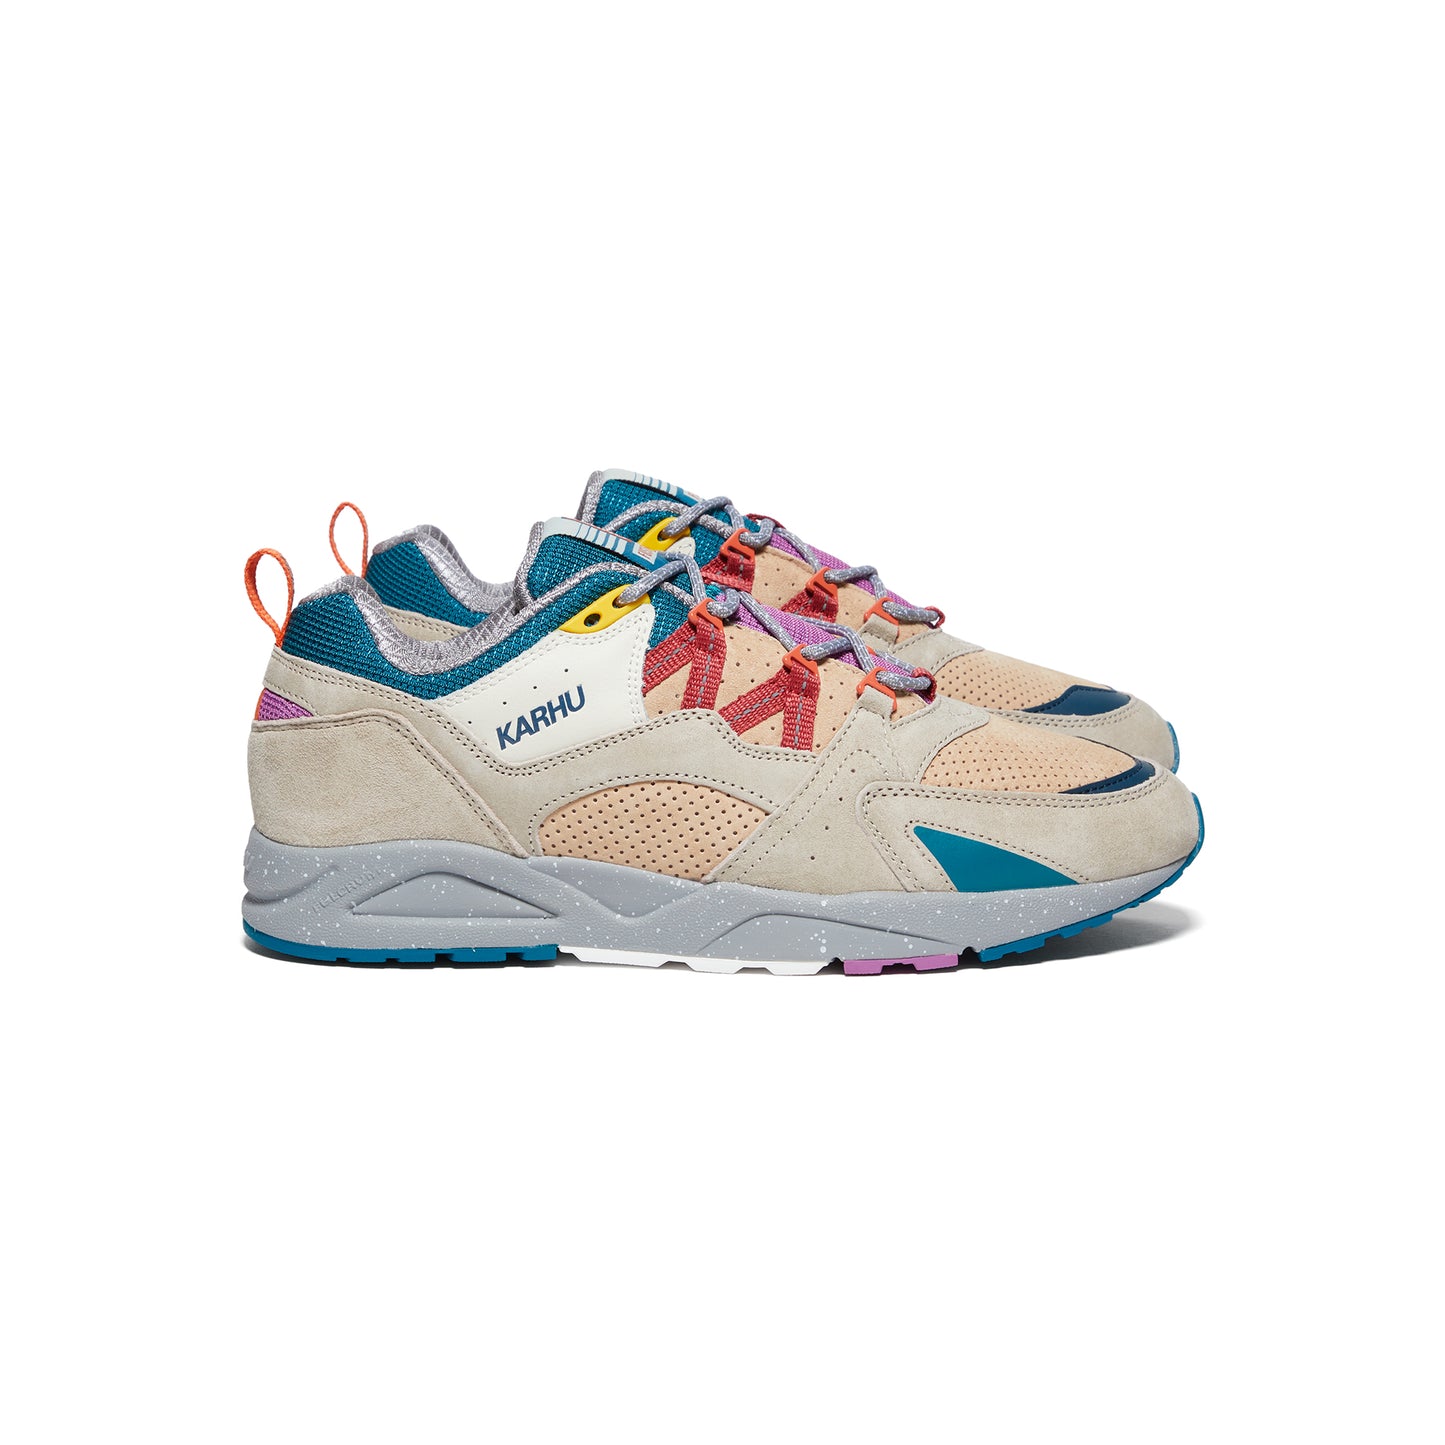 Karhu Fusion 2.0 (Silver Lining/Mineral Red)